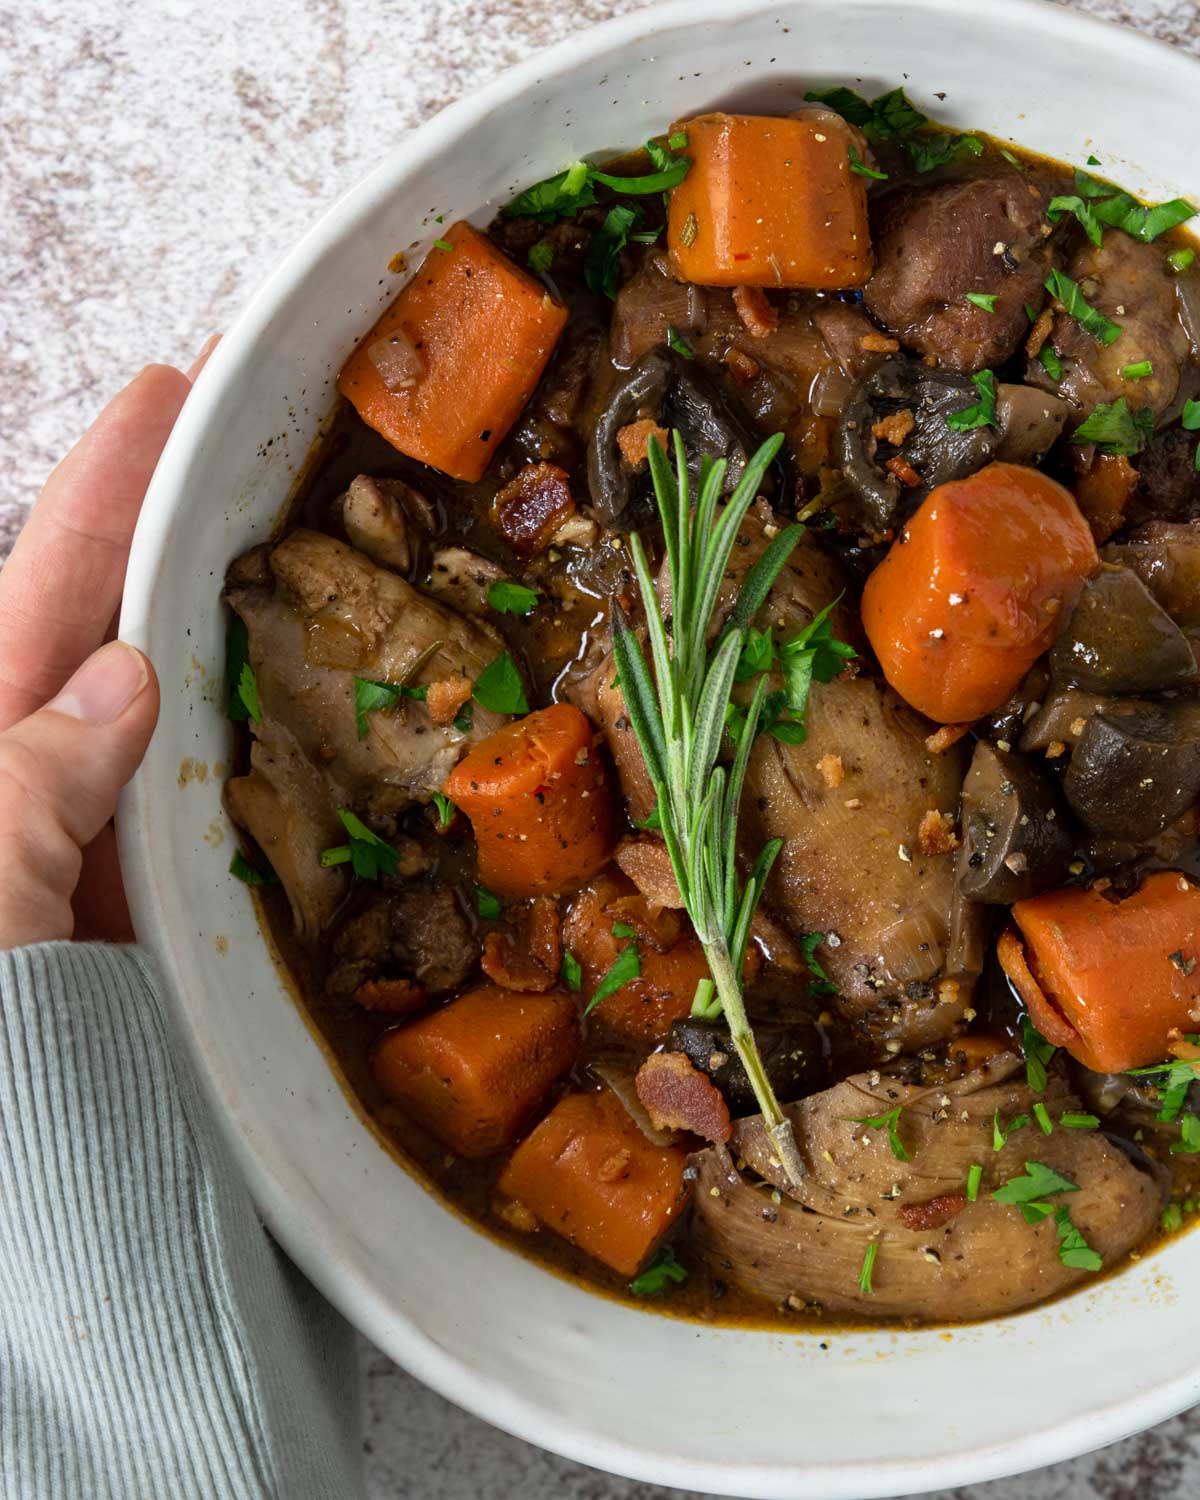 A big bowl of Coq Au Vin topped with rosemary sprig